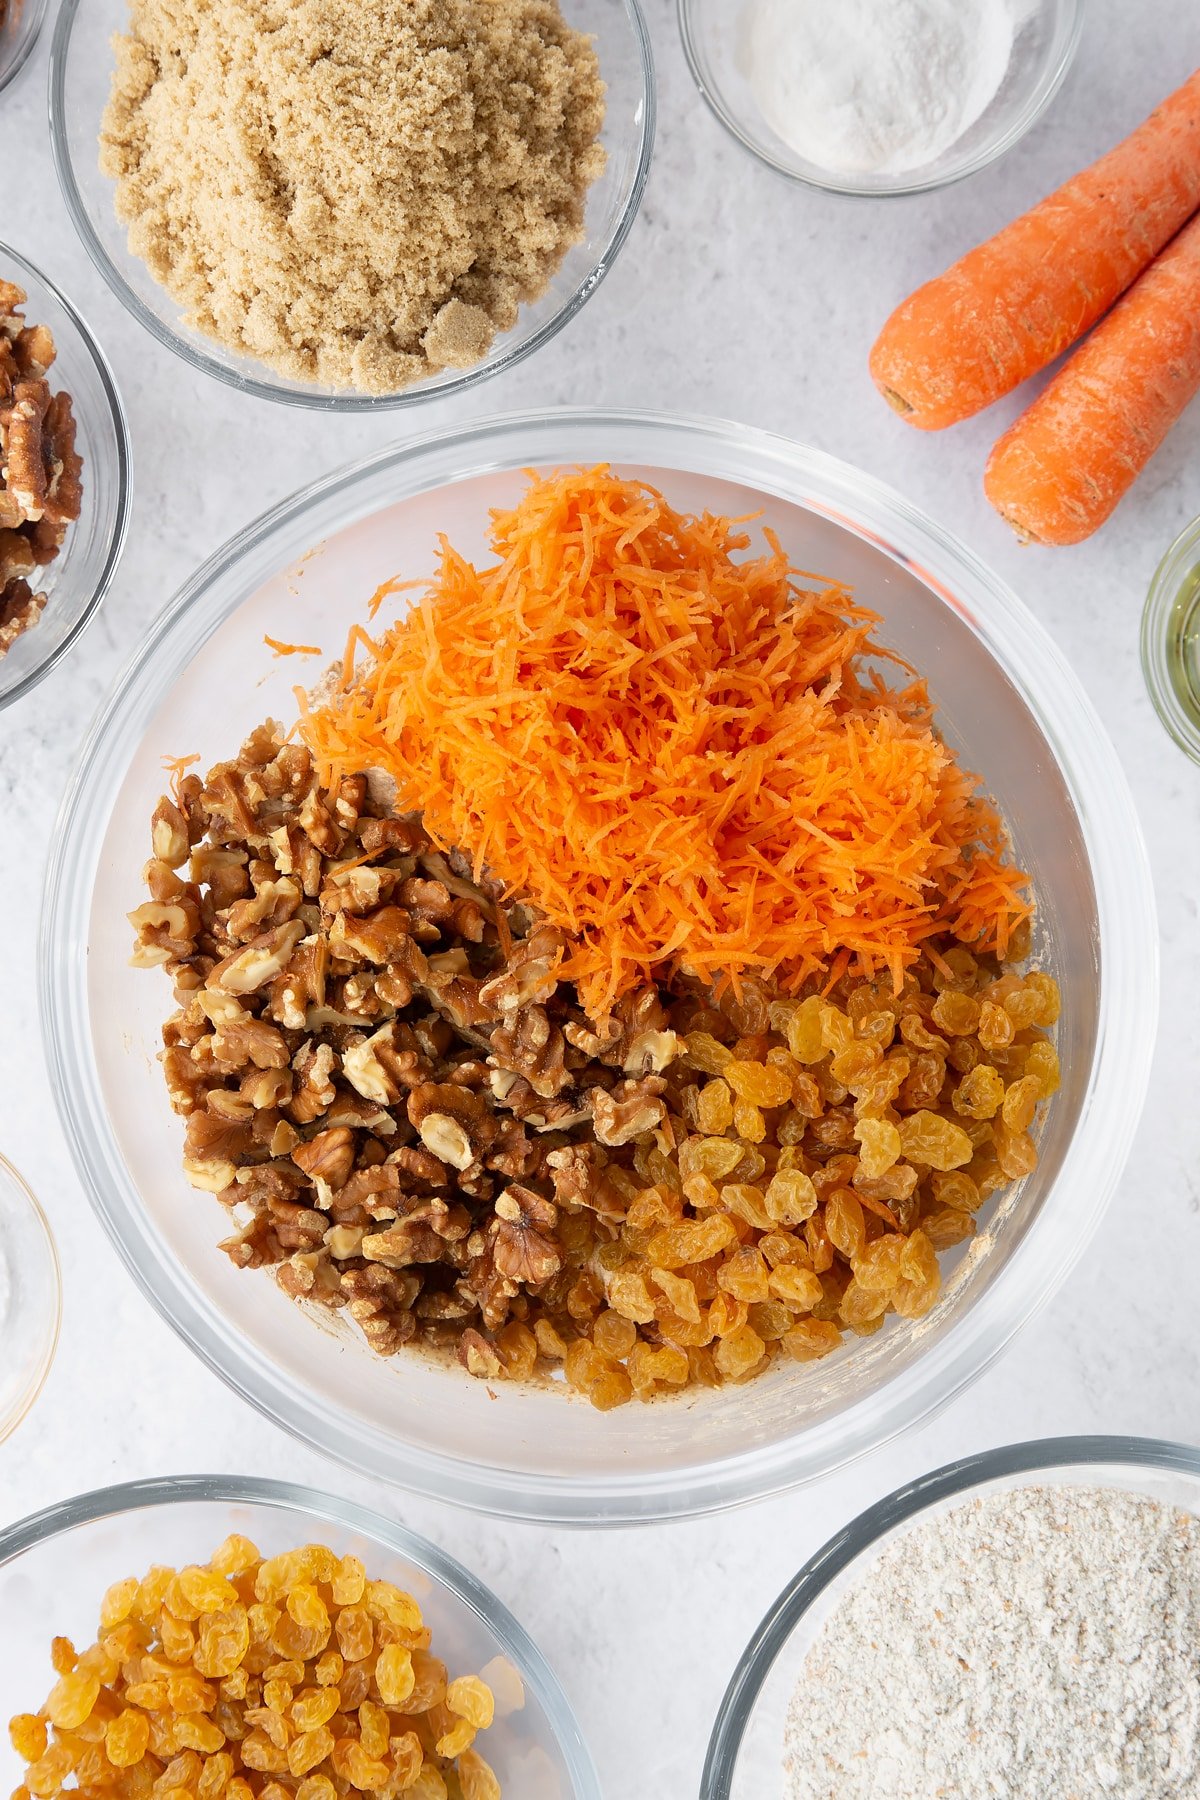 mixed Vegan carrot loaf cake batter in a large clear bowl topped with sultanas, walnuts and grated carrot.